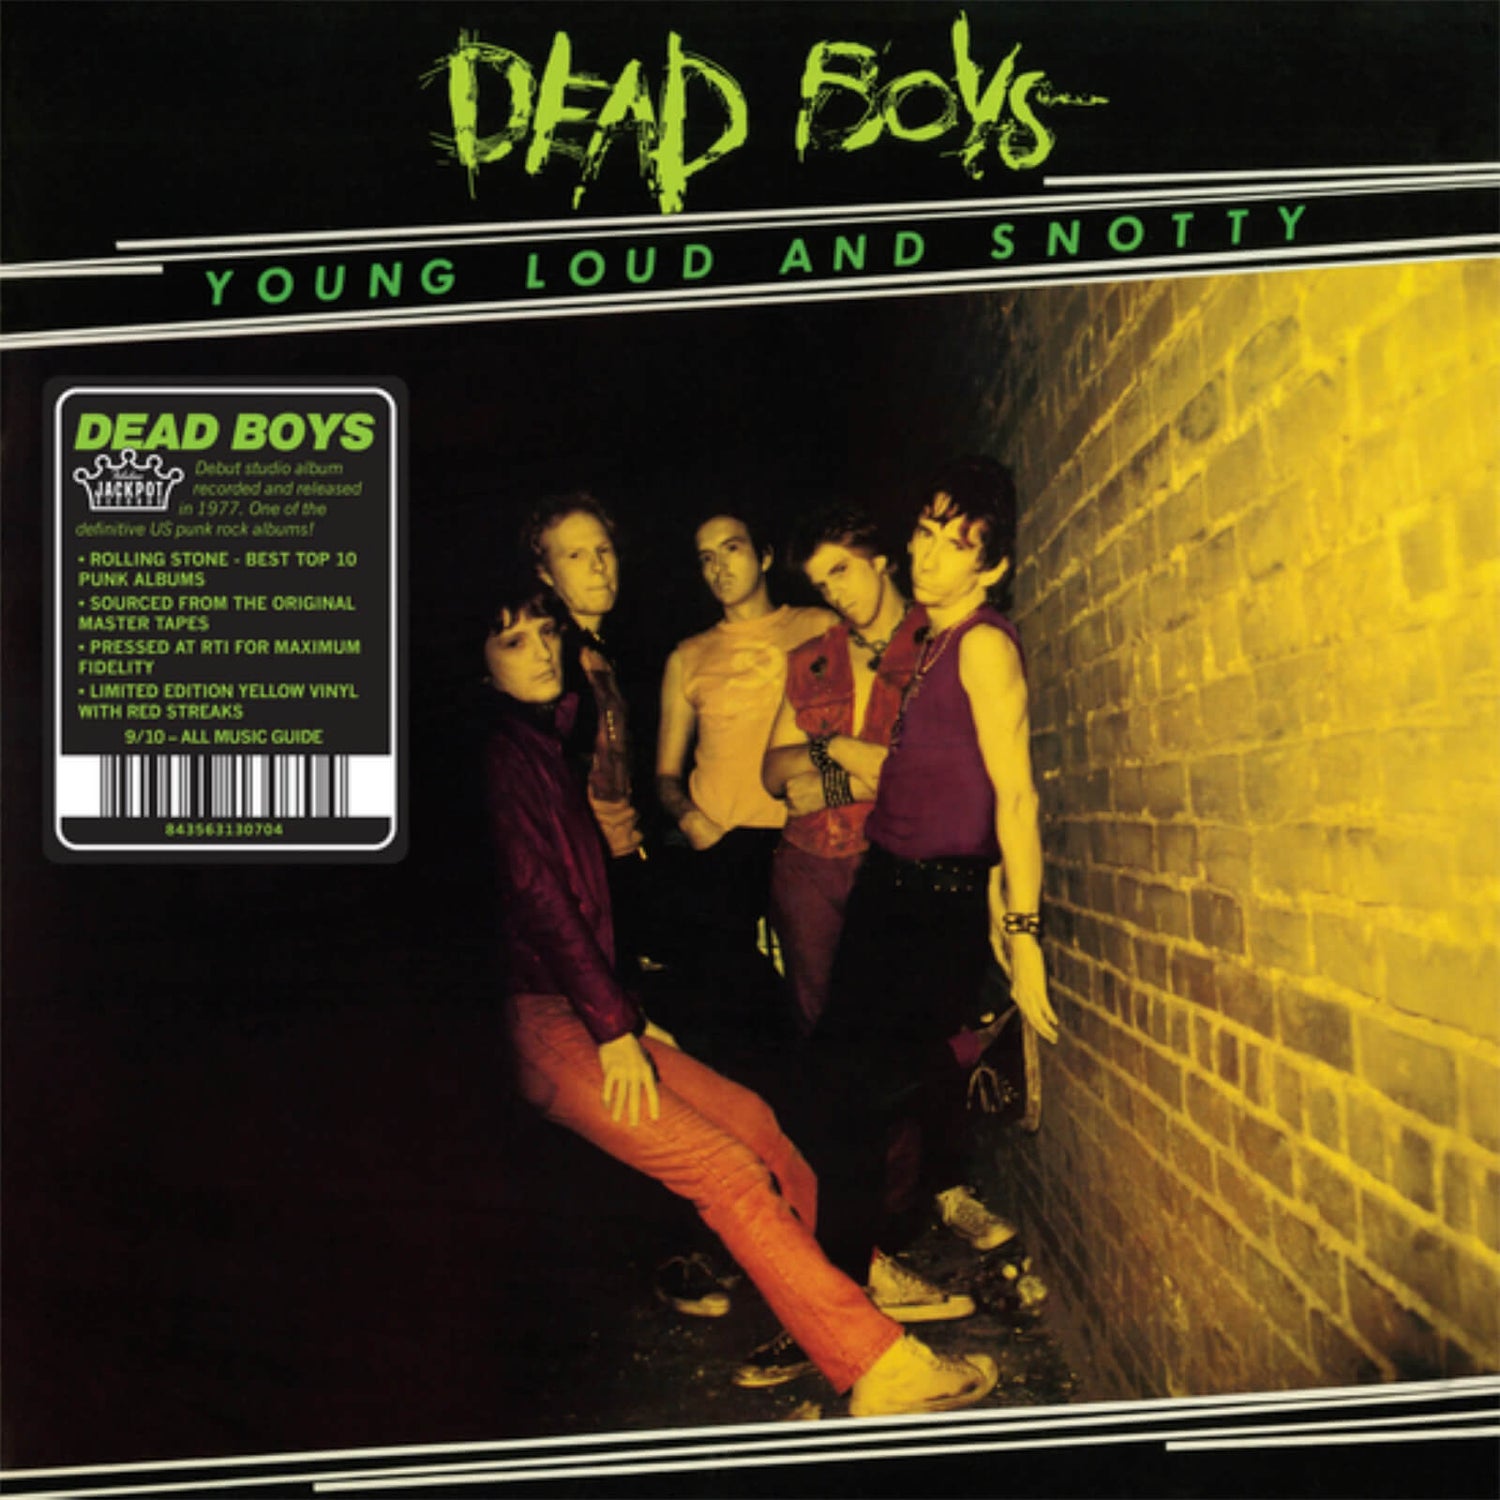 Dead Boys - Young Loud and Snotty Vinyl (Yellow with Red Streaks)